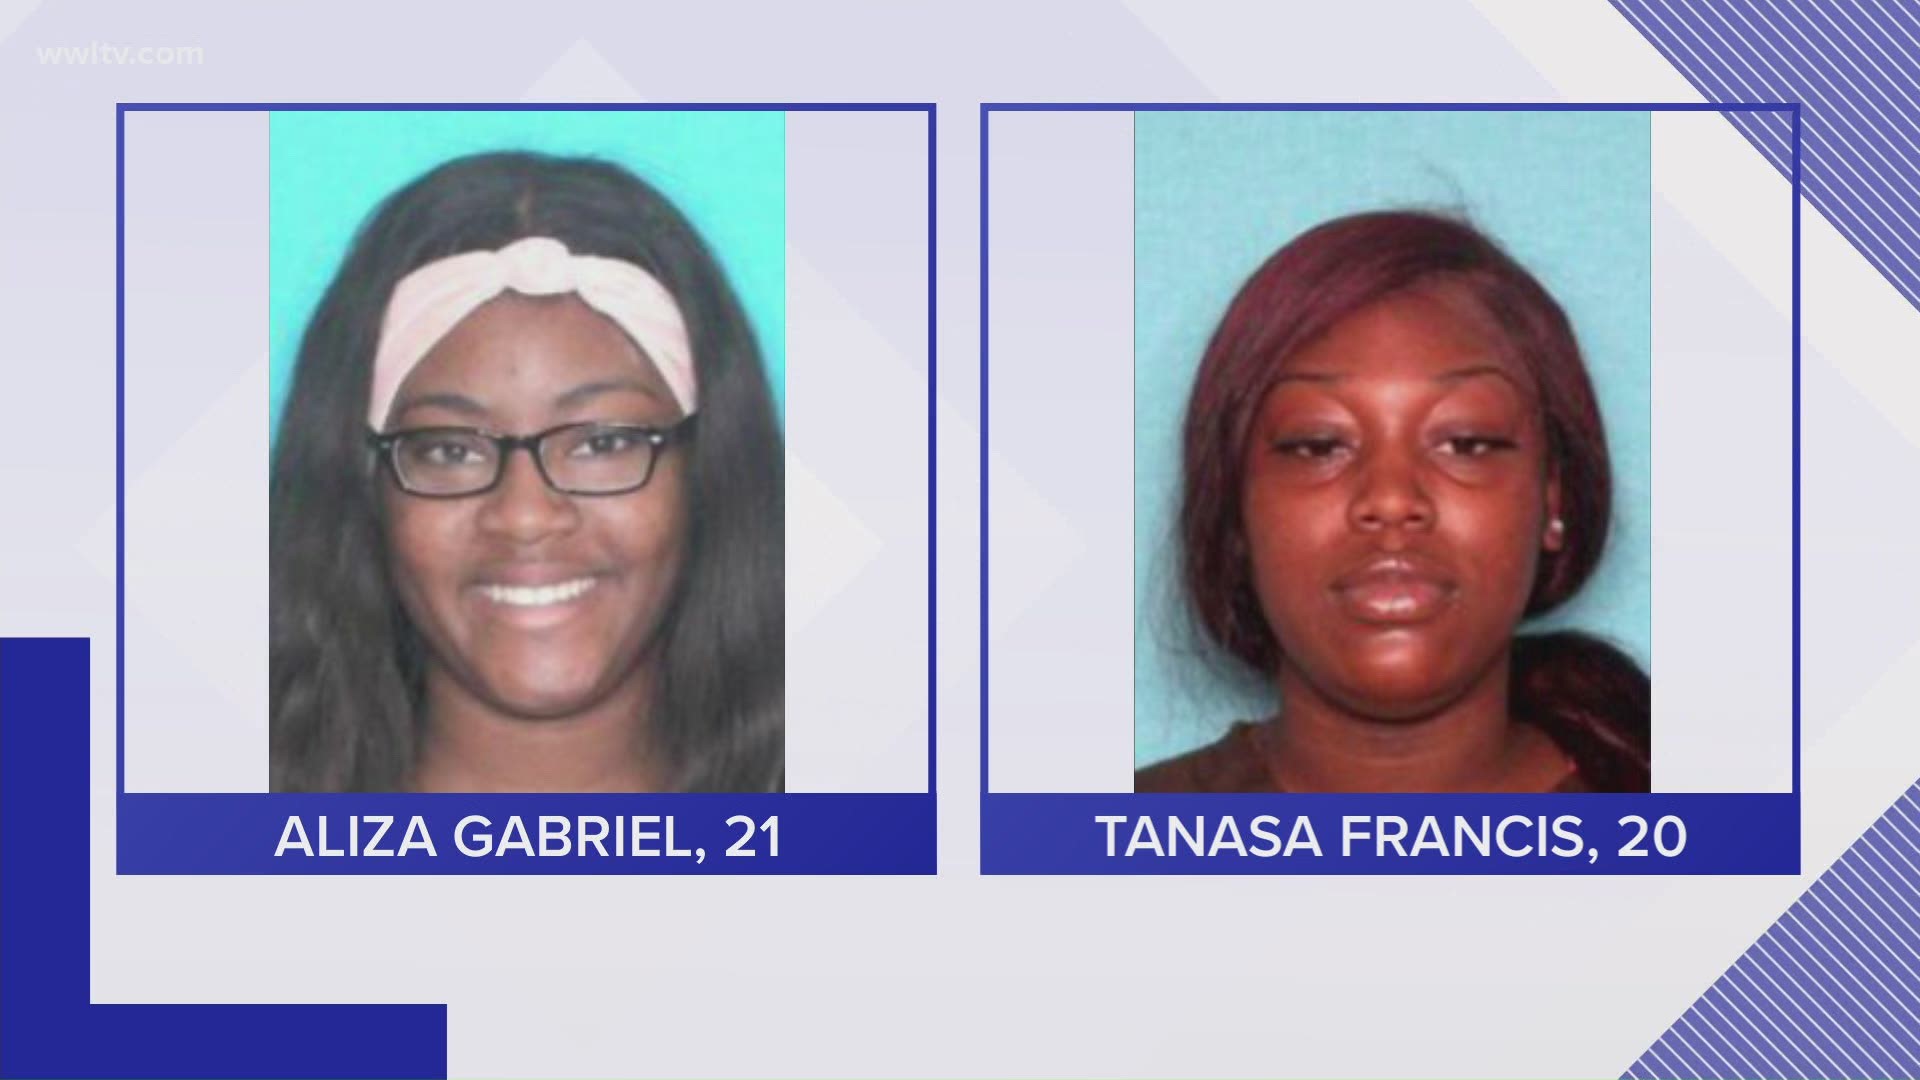 Both from Raceland, the victims were  Aliza Gabriel, 21, and Tanasa Francis, 20, a statement from LPSO said Sunday afternoon.